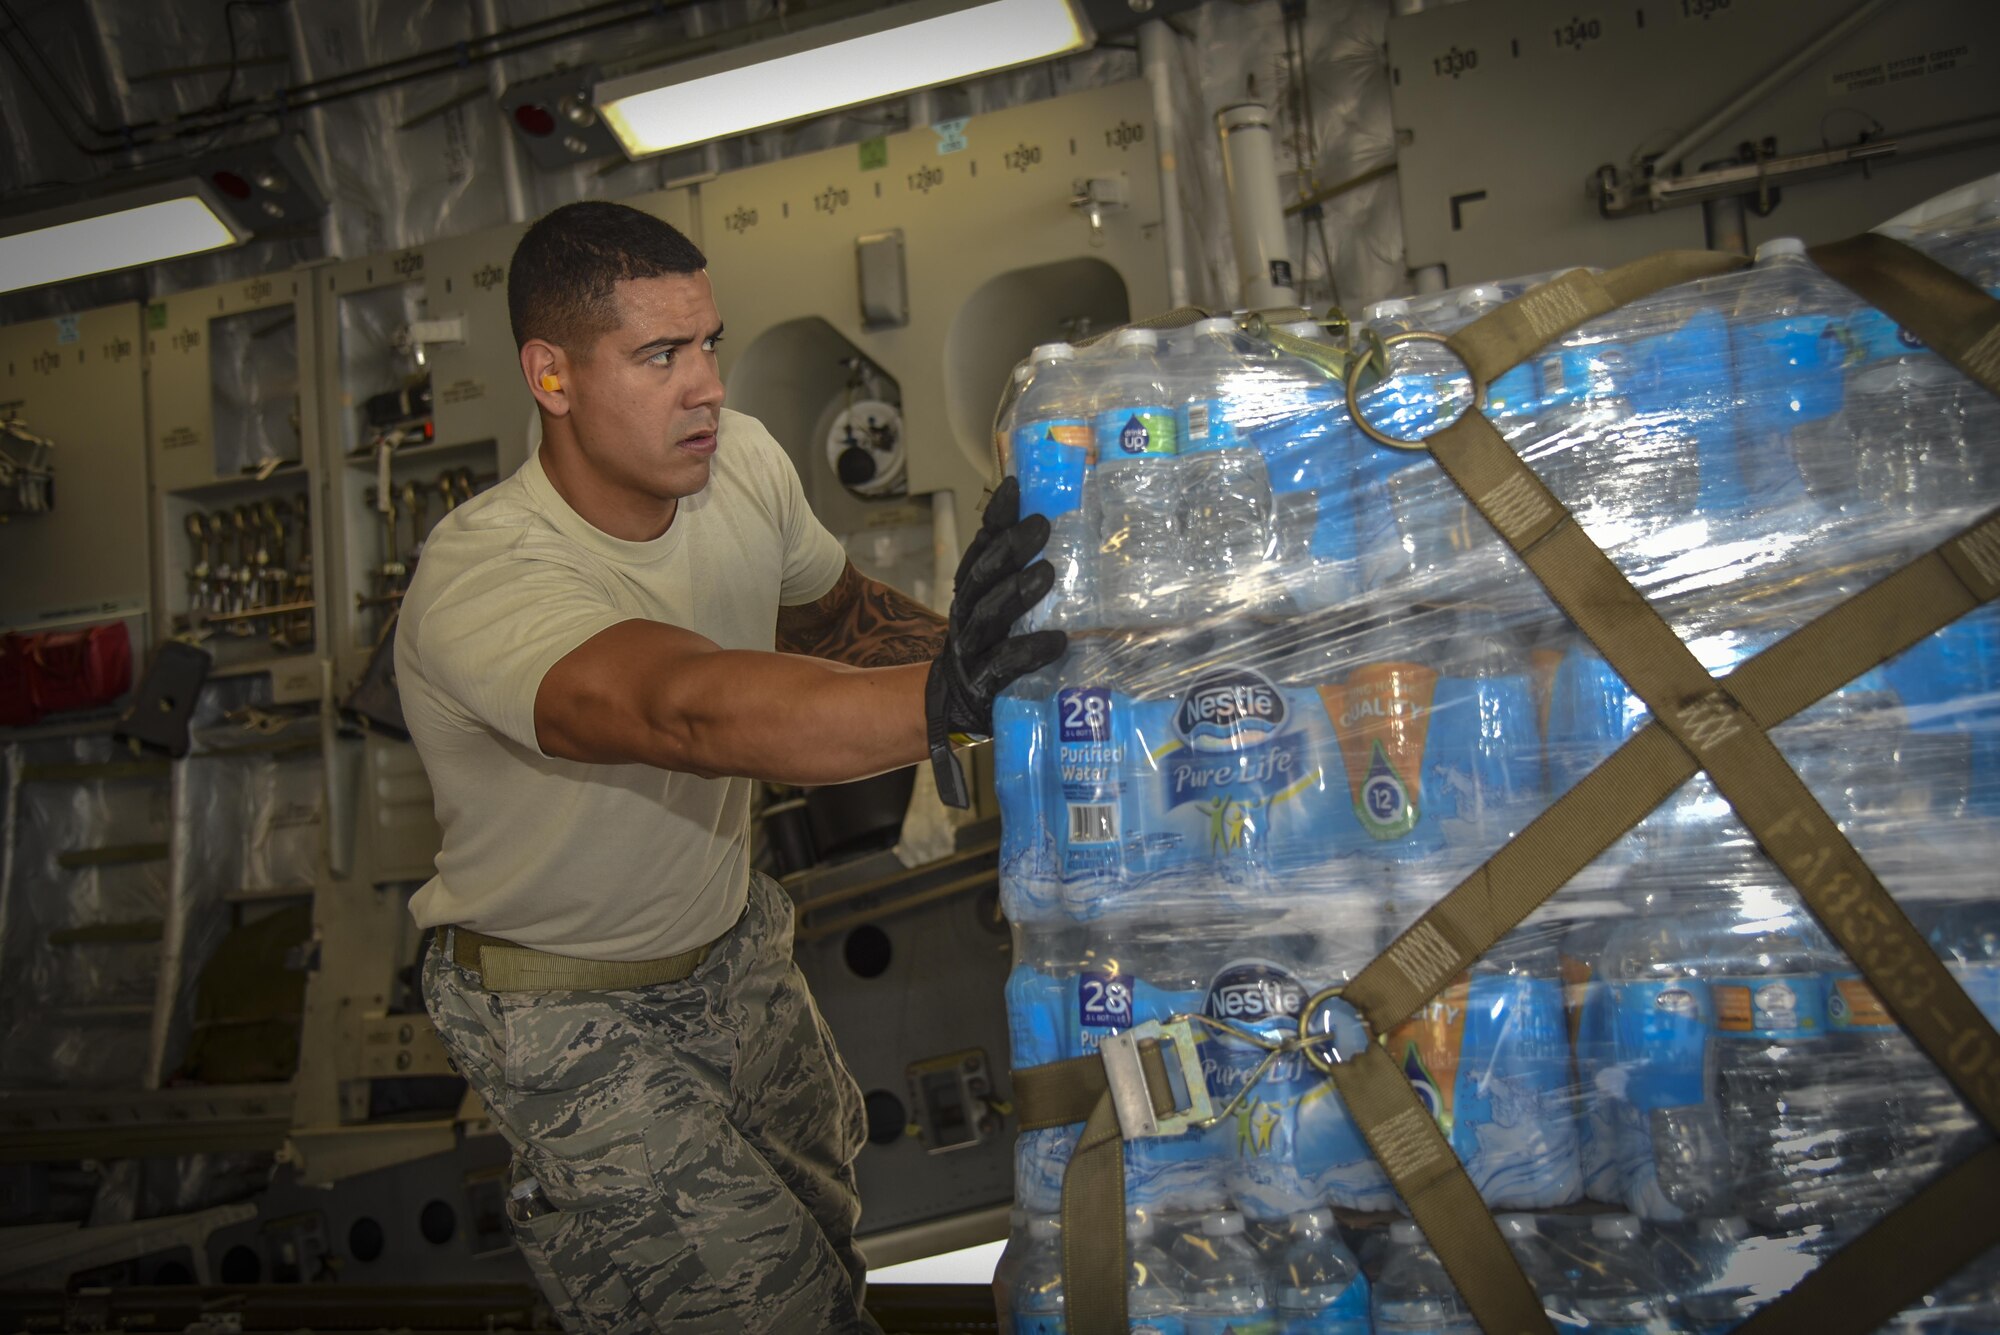 U.S. Air Force Senior Airman Allan Canizales assigned to the 6th Logistics Readiness Squadron, prepares a pallet of water to be offloaded at MacDill Air Force Base, Fla., Sept. 12, 2017.